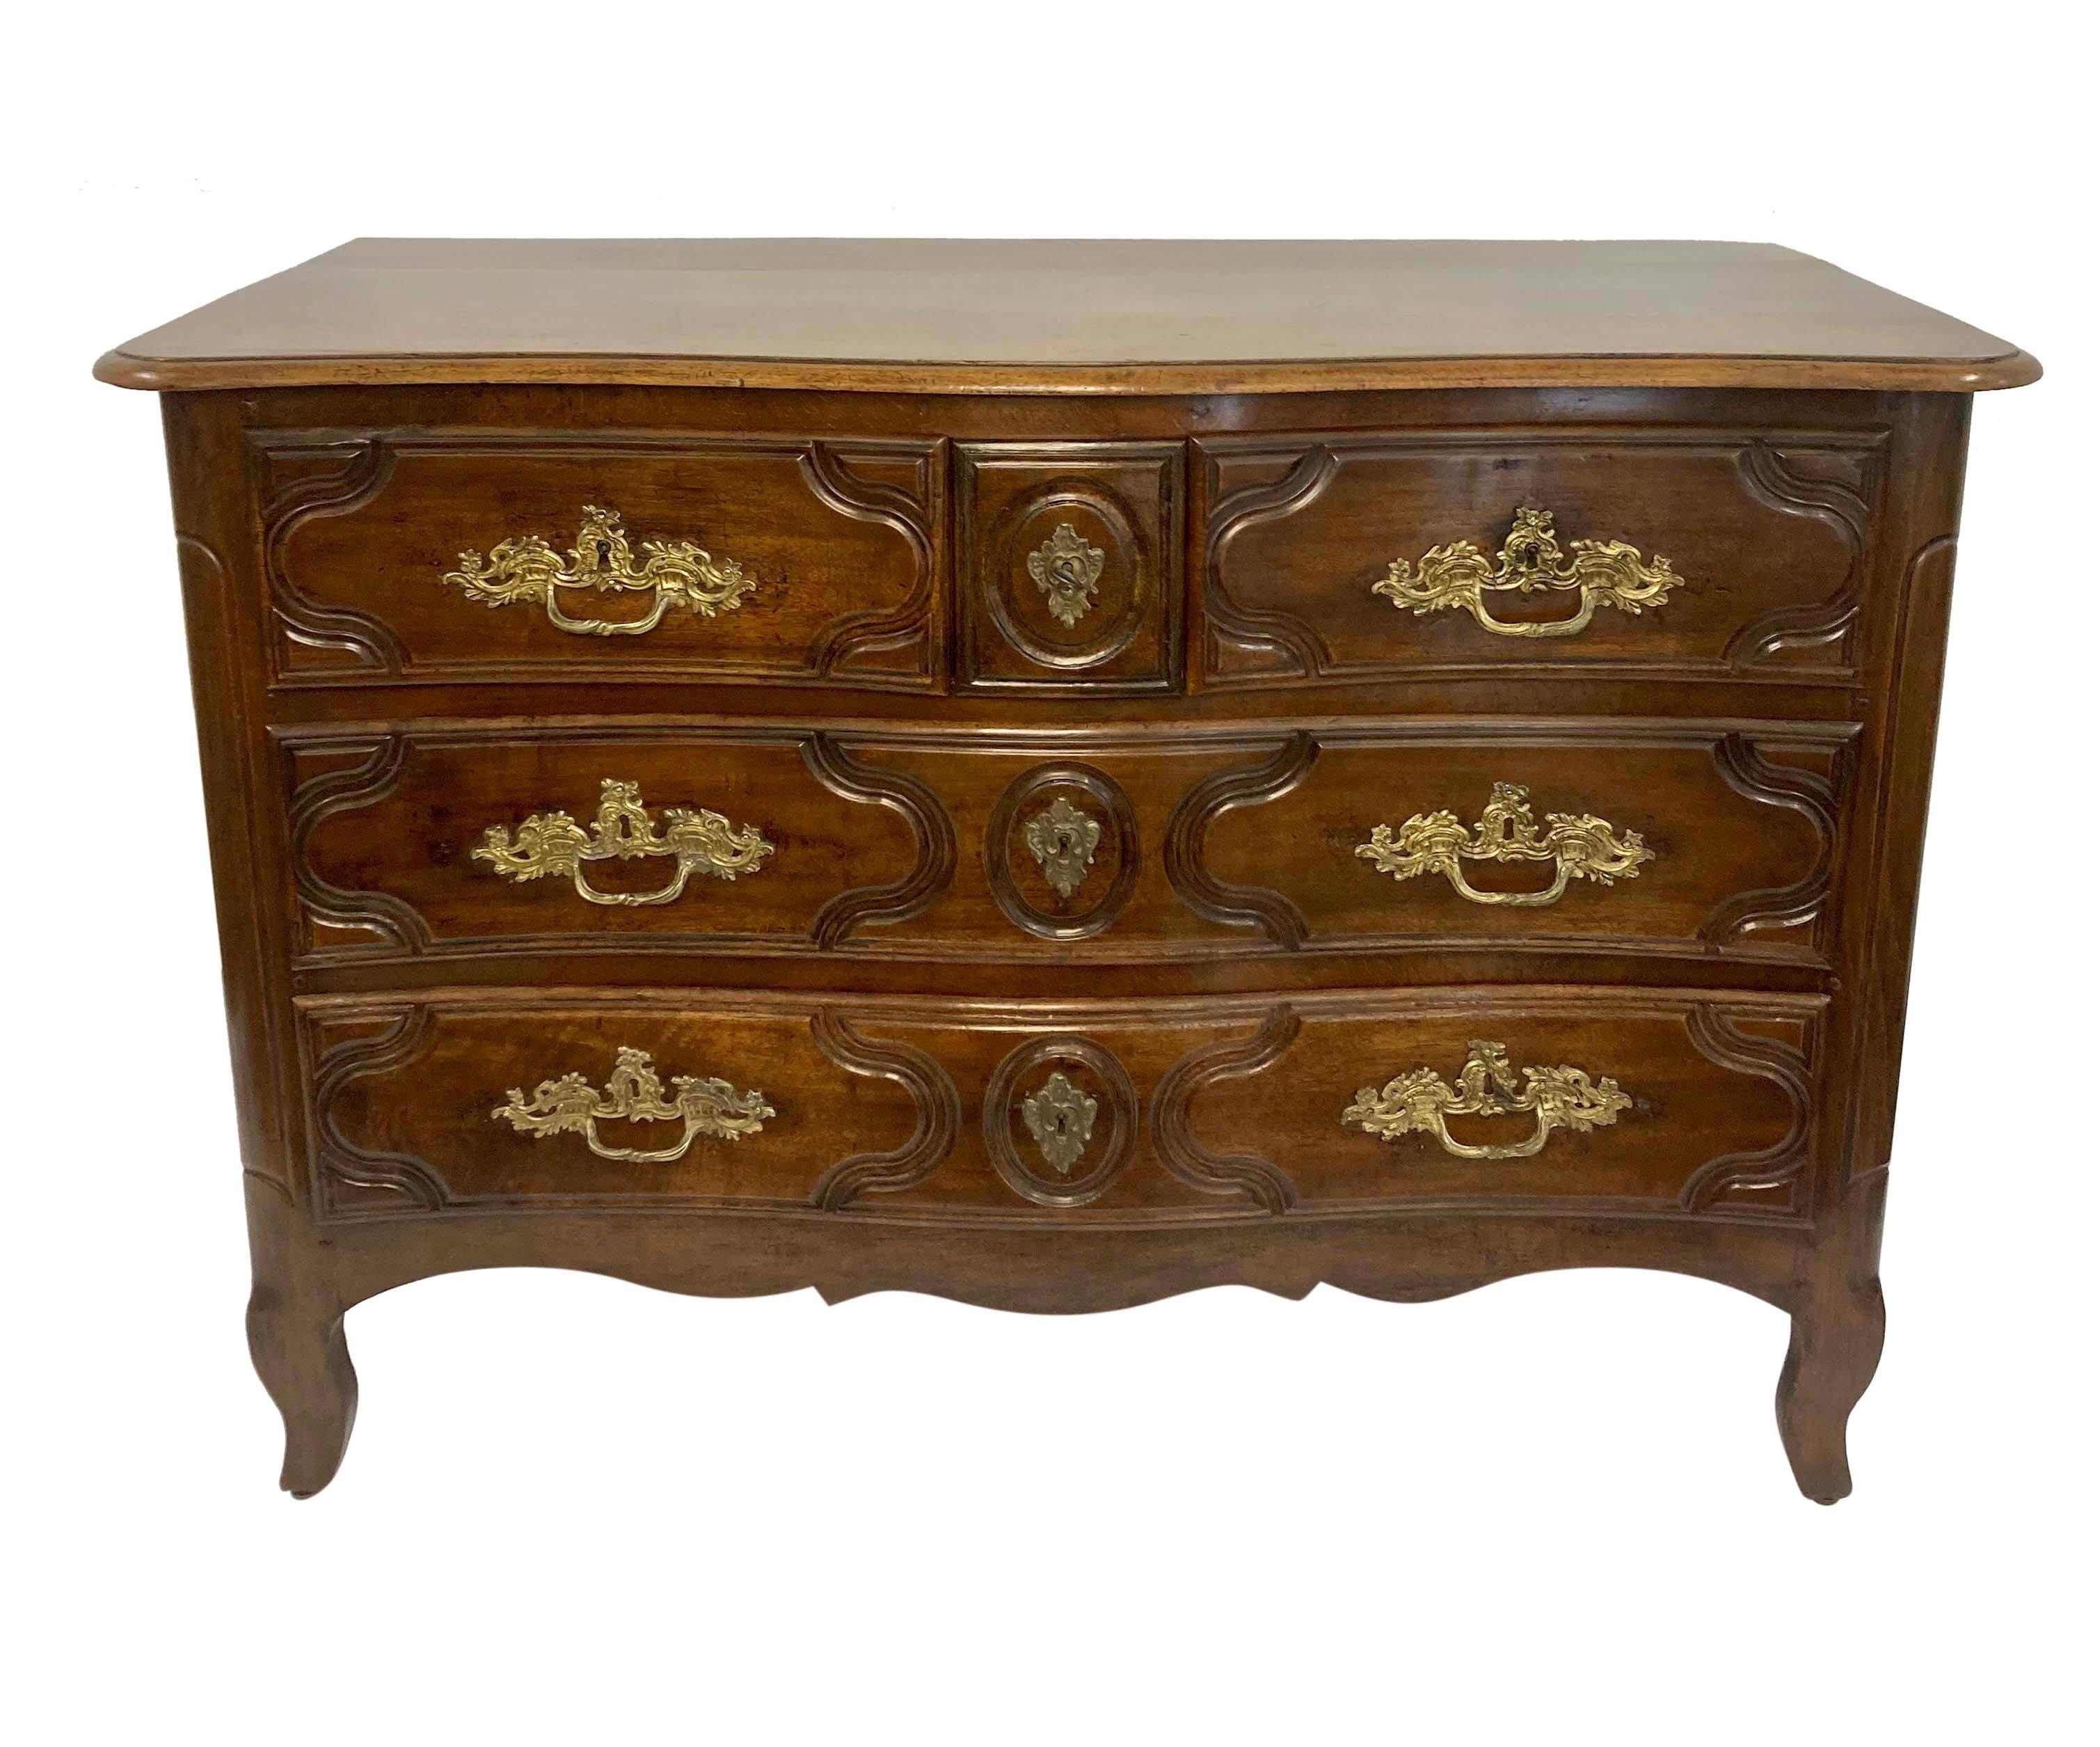 An XVIII Century French Louis XV walnut commode, with a serpentine front and five drawers. The original handles in gilt bronze, carefully restored with a great patina.